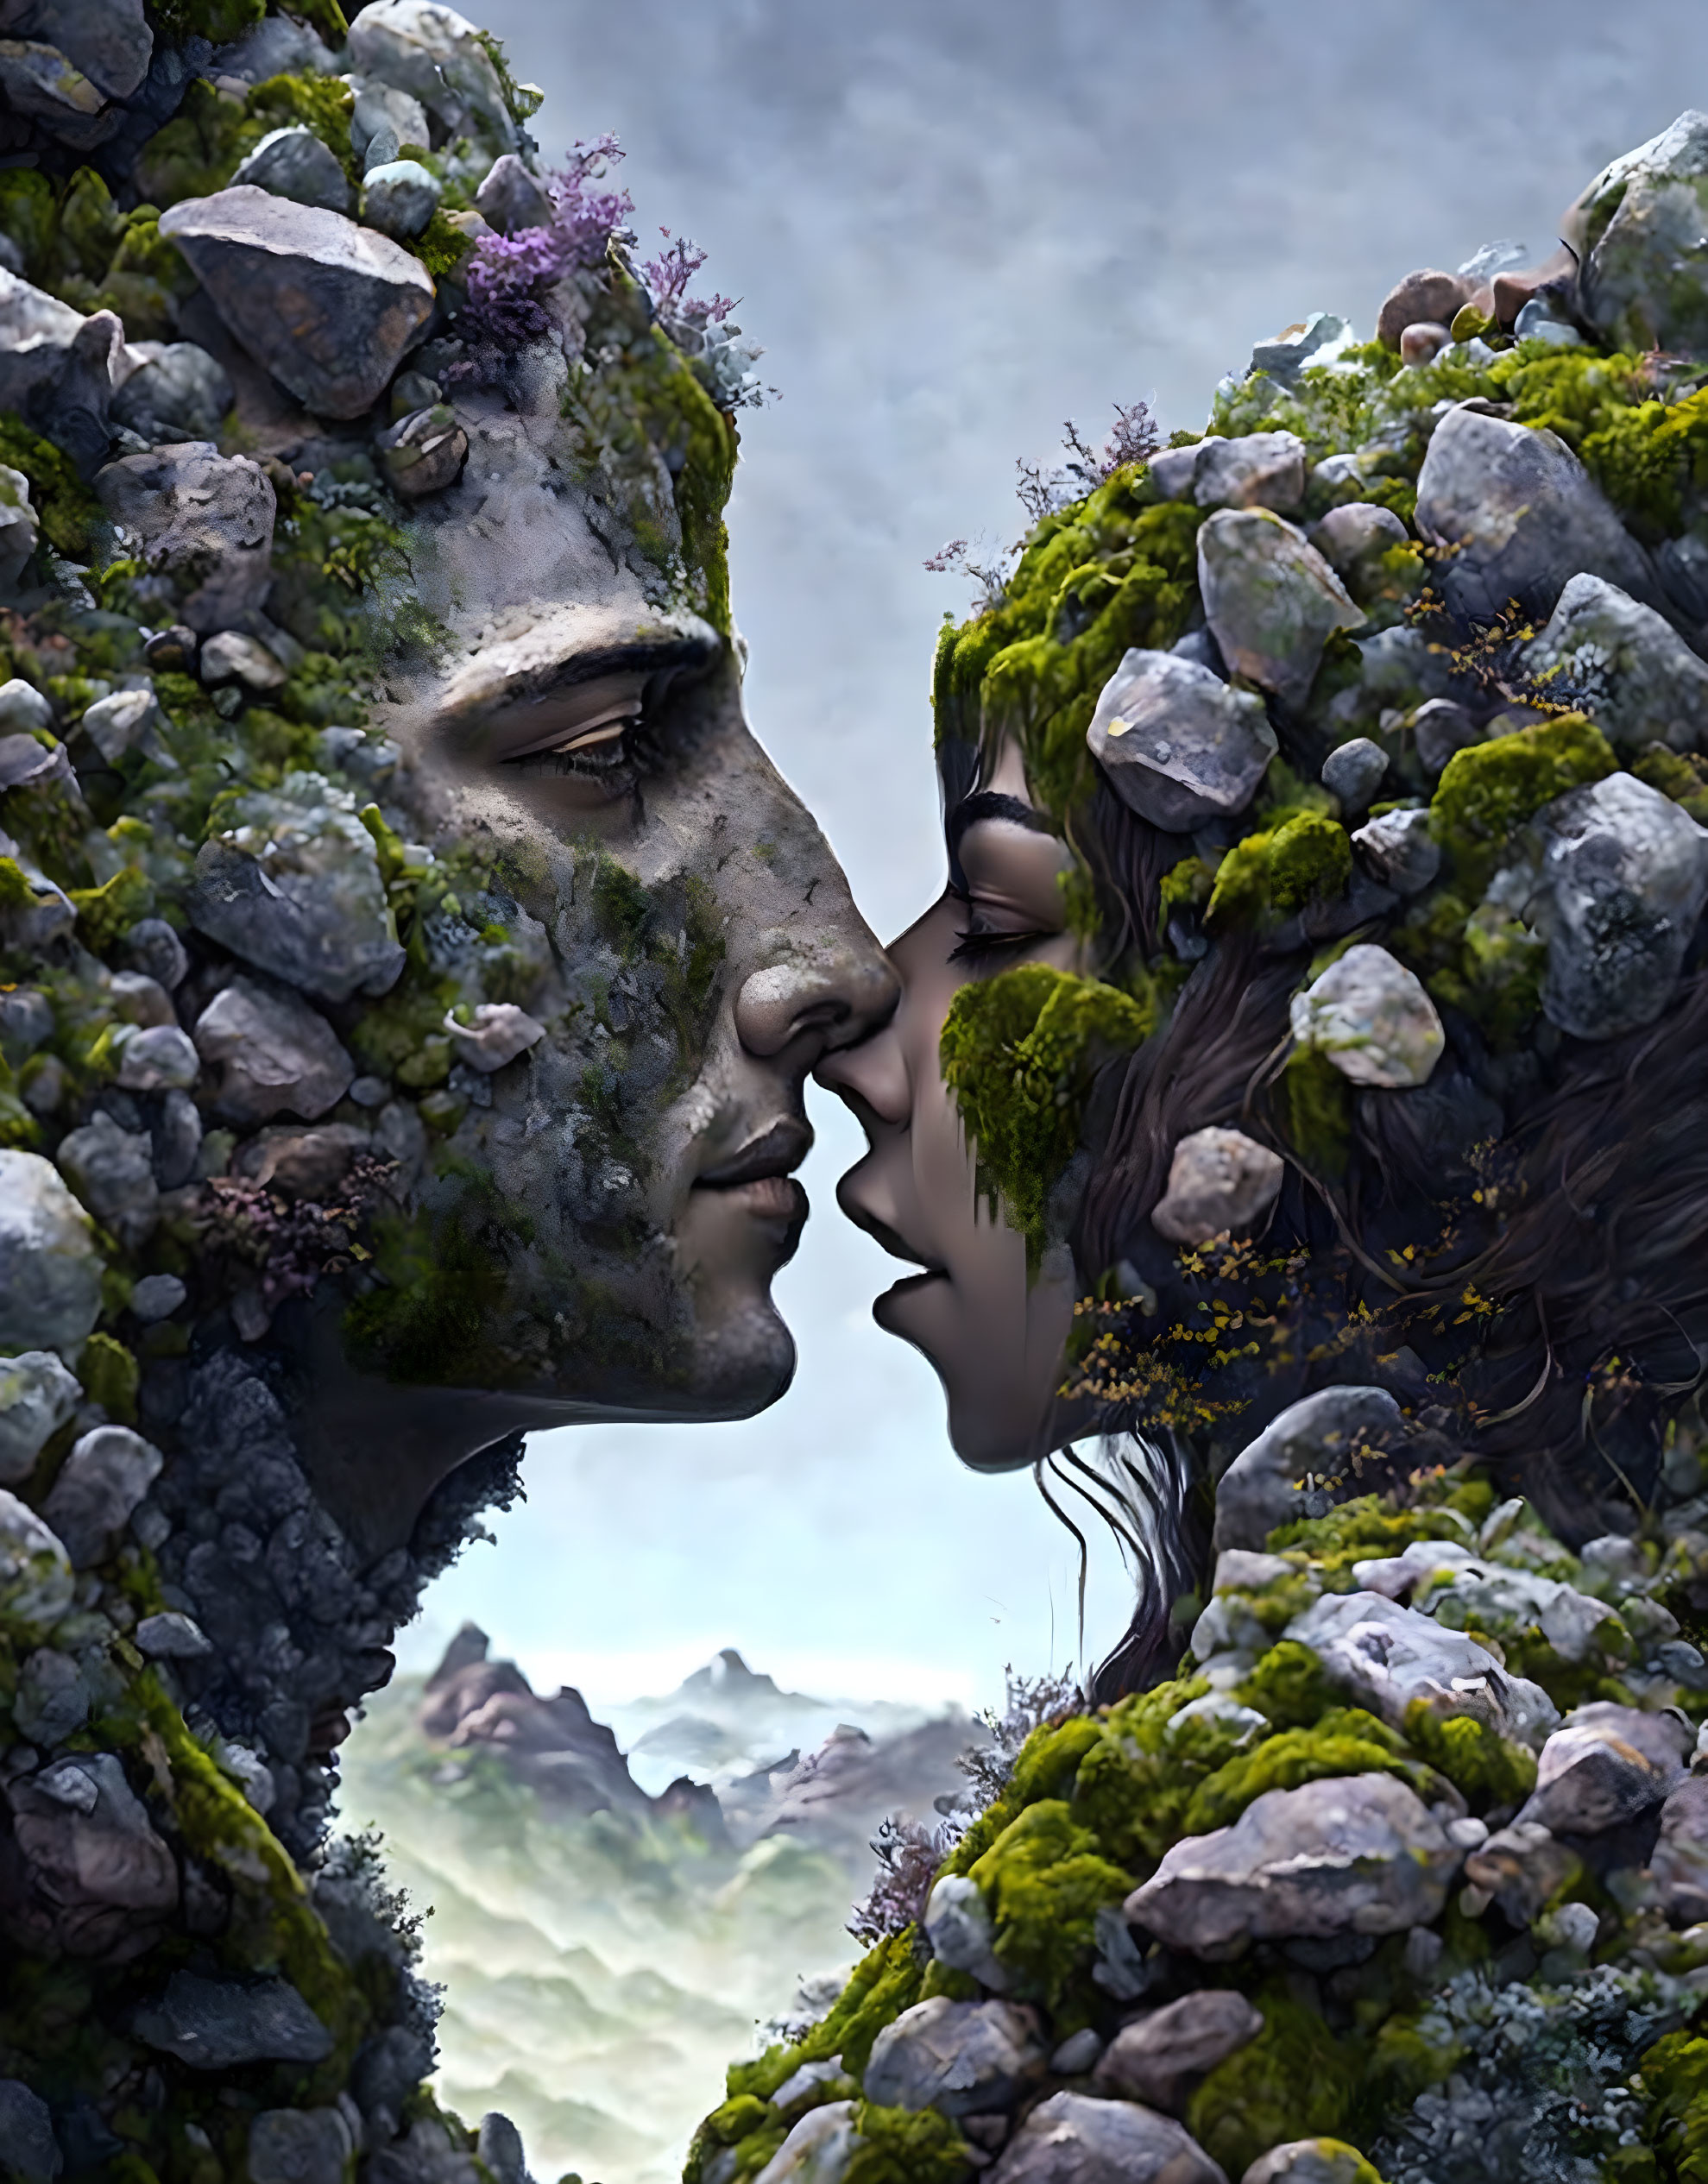 Rocky faces covered in moss about to kiss against mountain backdrop